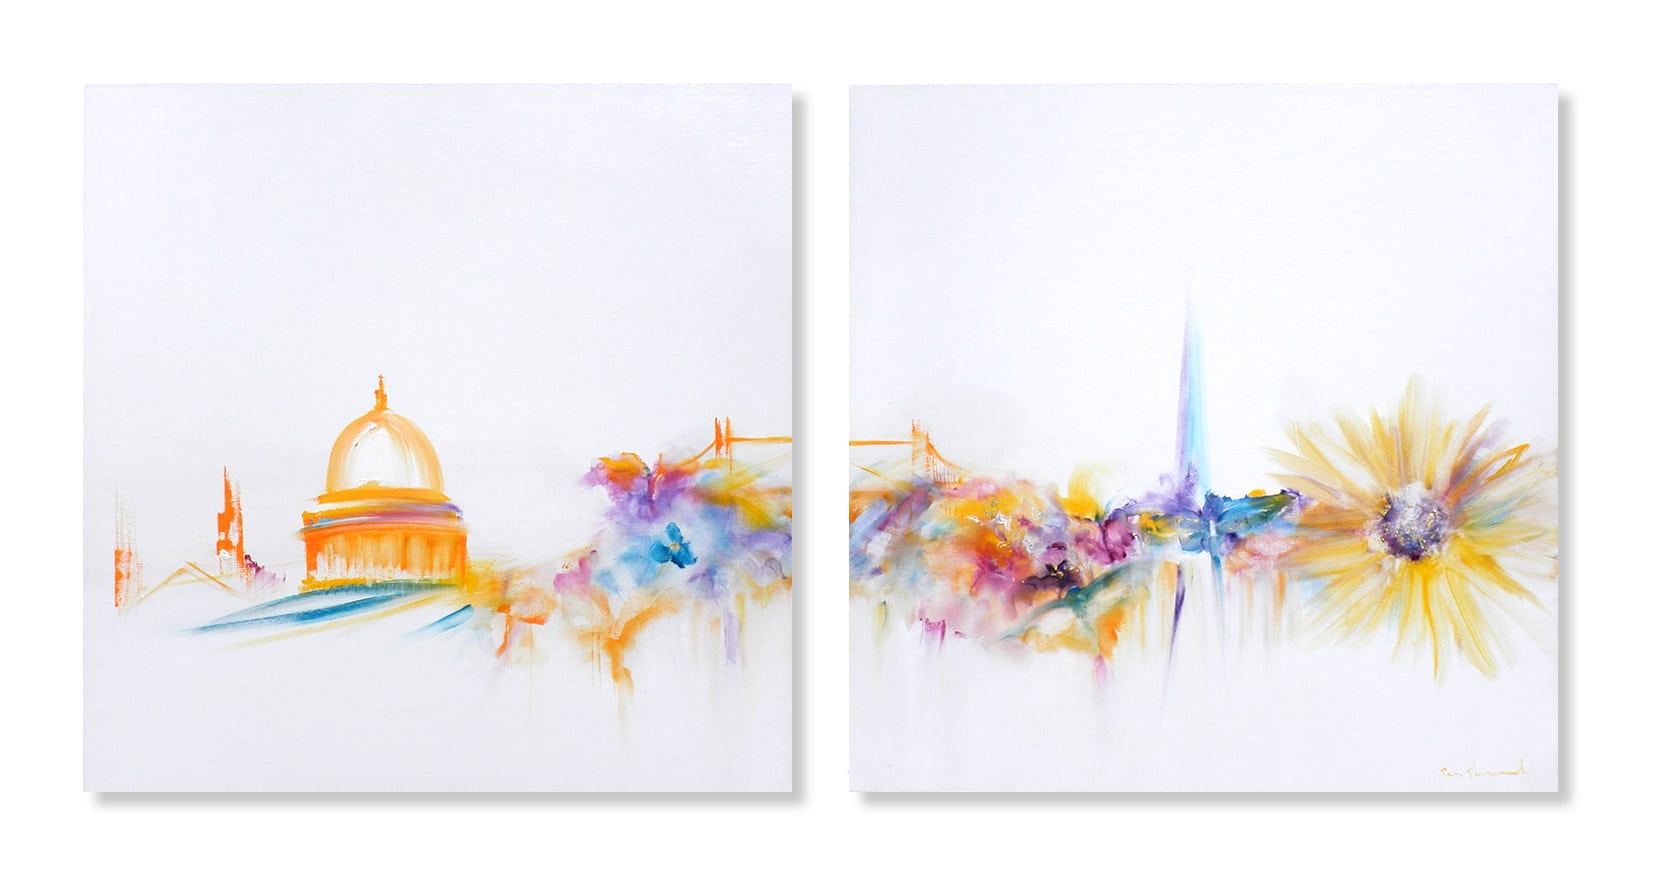 "Bridging the Gap" London Cityscape by Sara Sherwood - Contemporary Cityscape Abstract Artist London